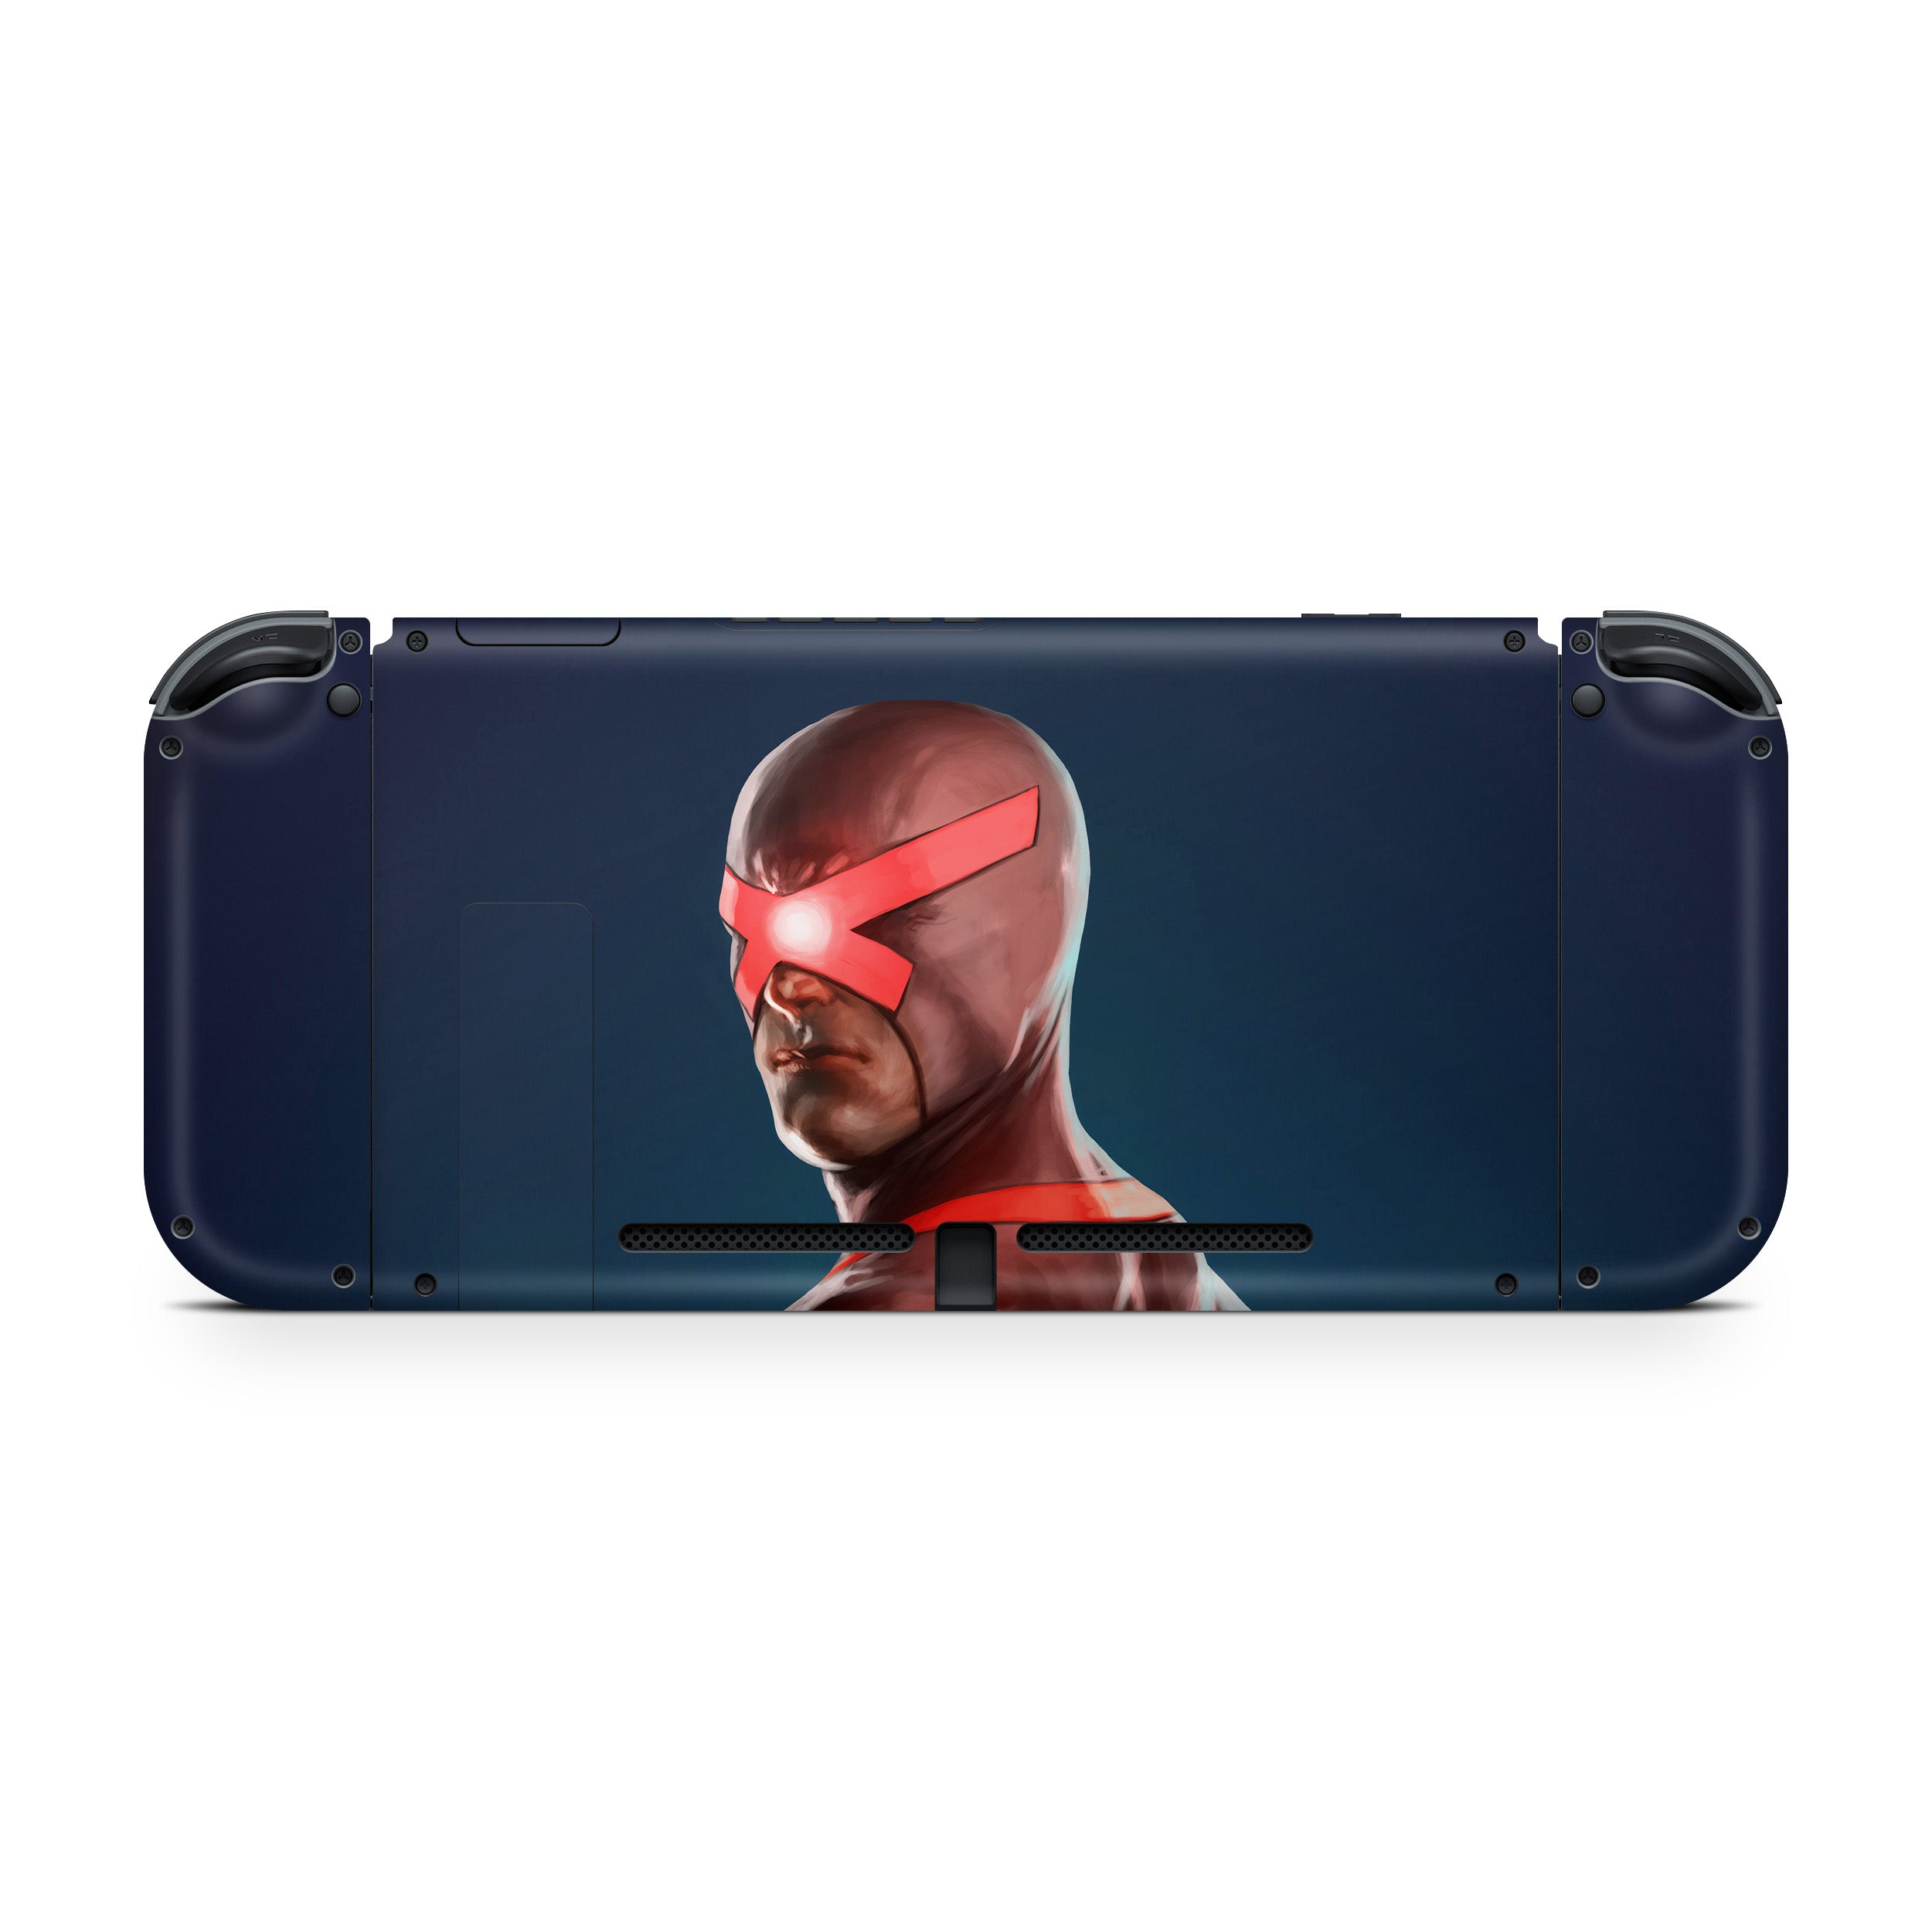 A video game skin featuring a Marvel Comics X Men Cyclops design for the Nintendo Switch.